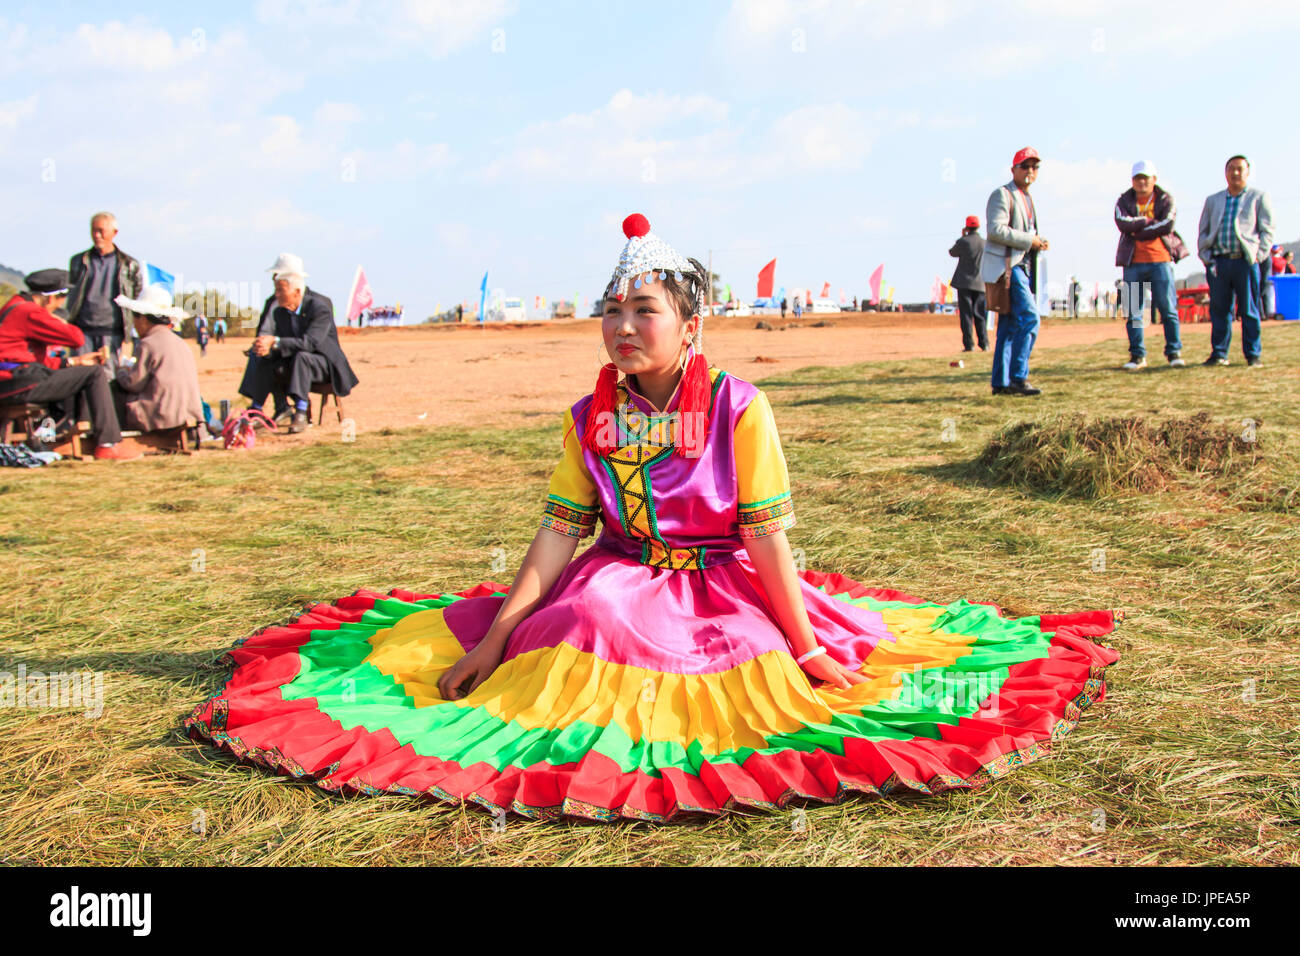 Chinese girl in traditional Chinese clothing during the Heqing Qifeng Pear Flower festival, China Stock Photo